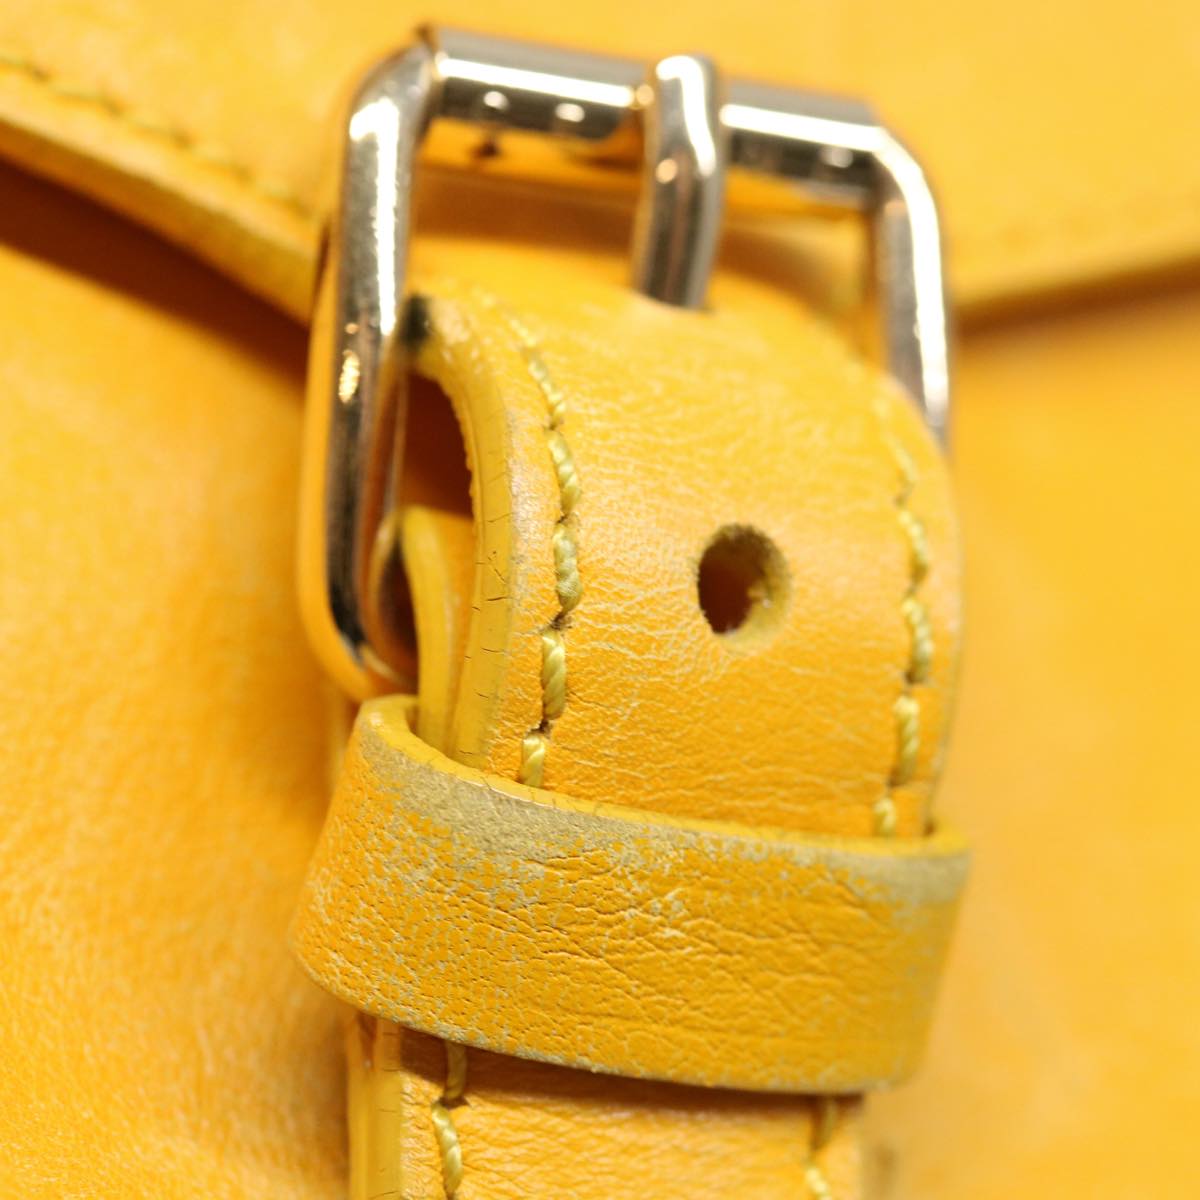 CELINE Hand Bag Leather Yellow Auth fm3342